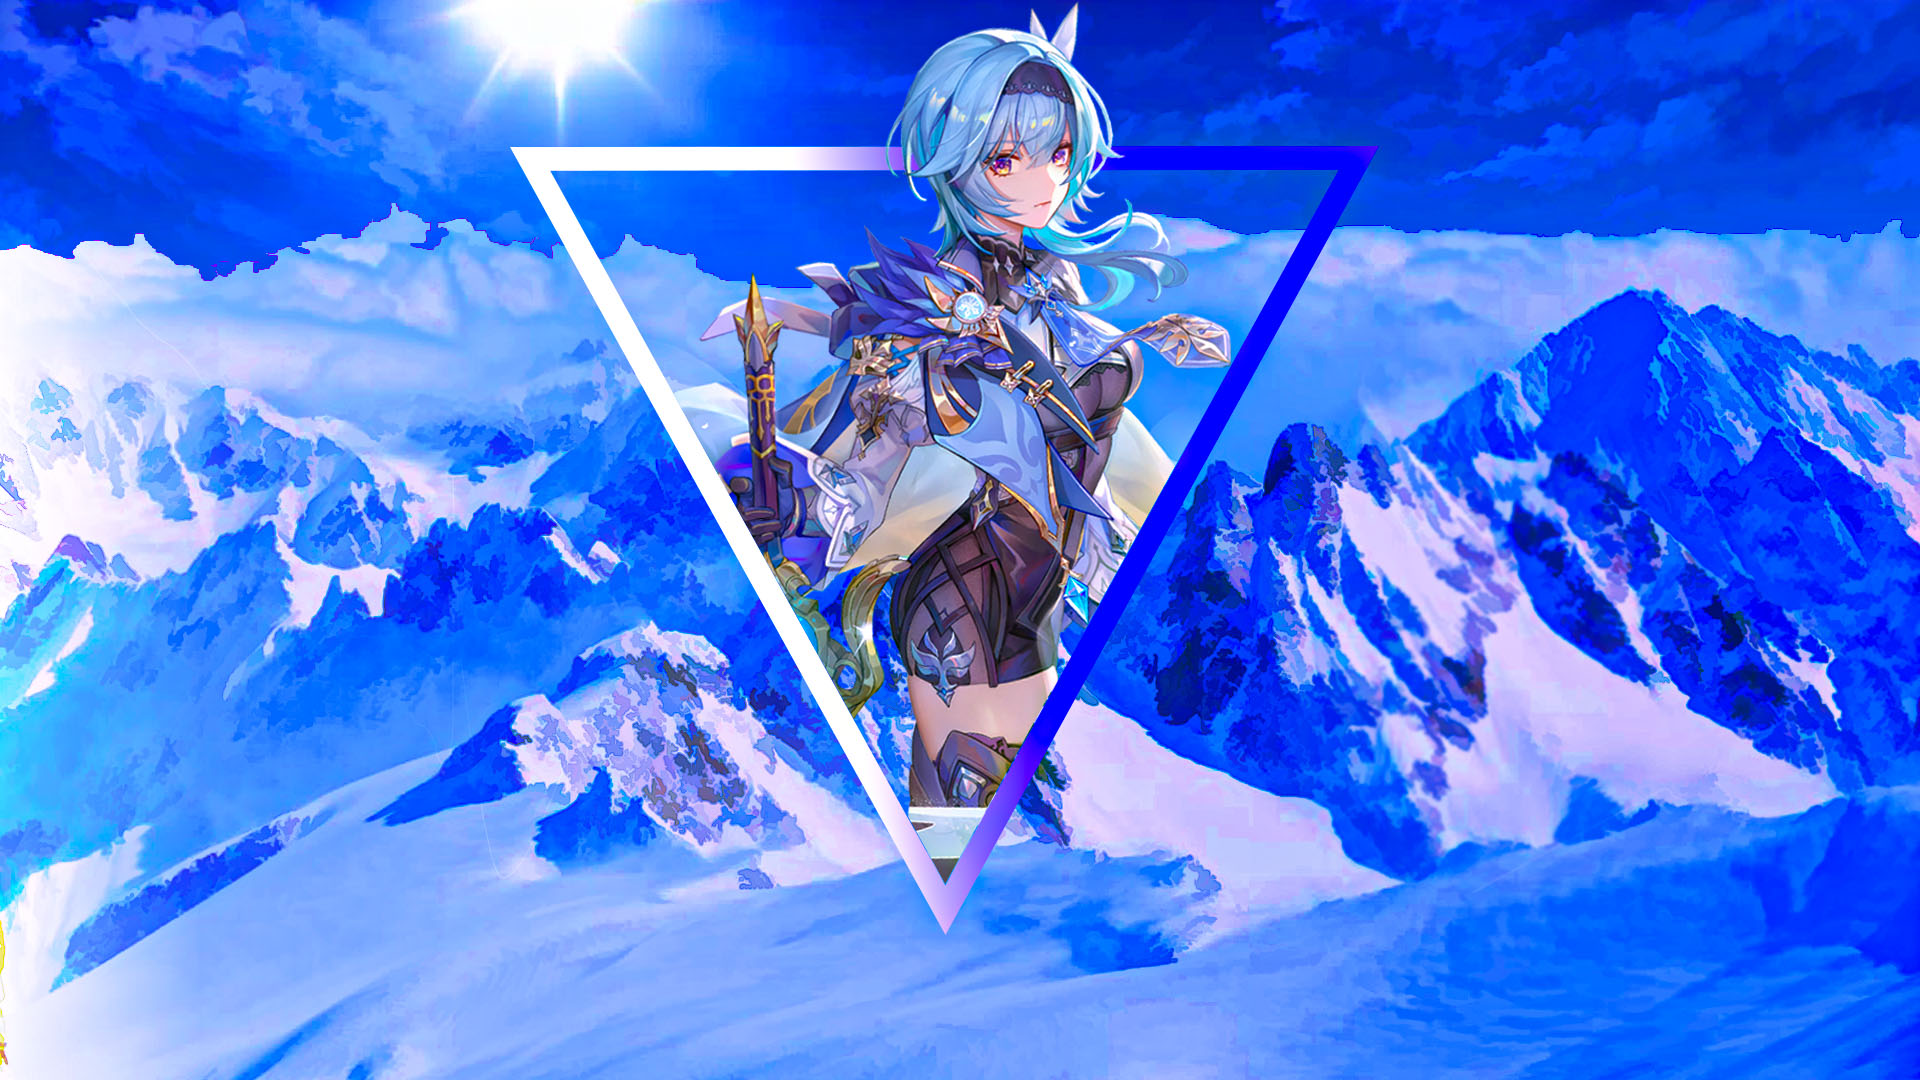 Genshin Impact Eula Genshin Impact Snow Mountains Sky Blue Picture In Picture Anime Girls 1920x1080